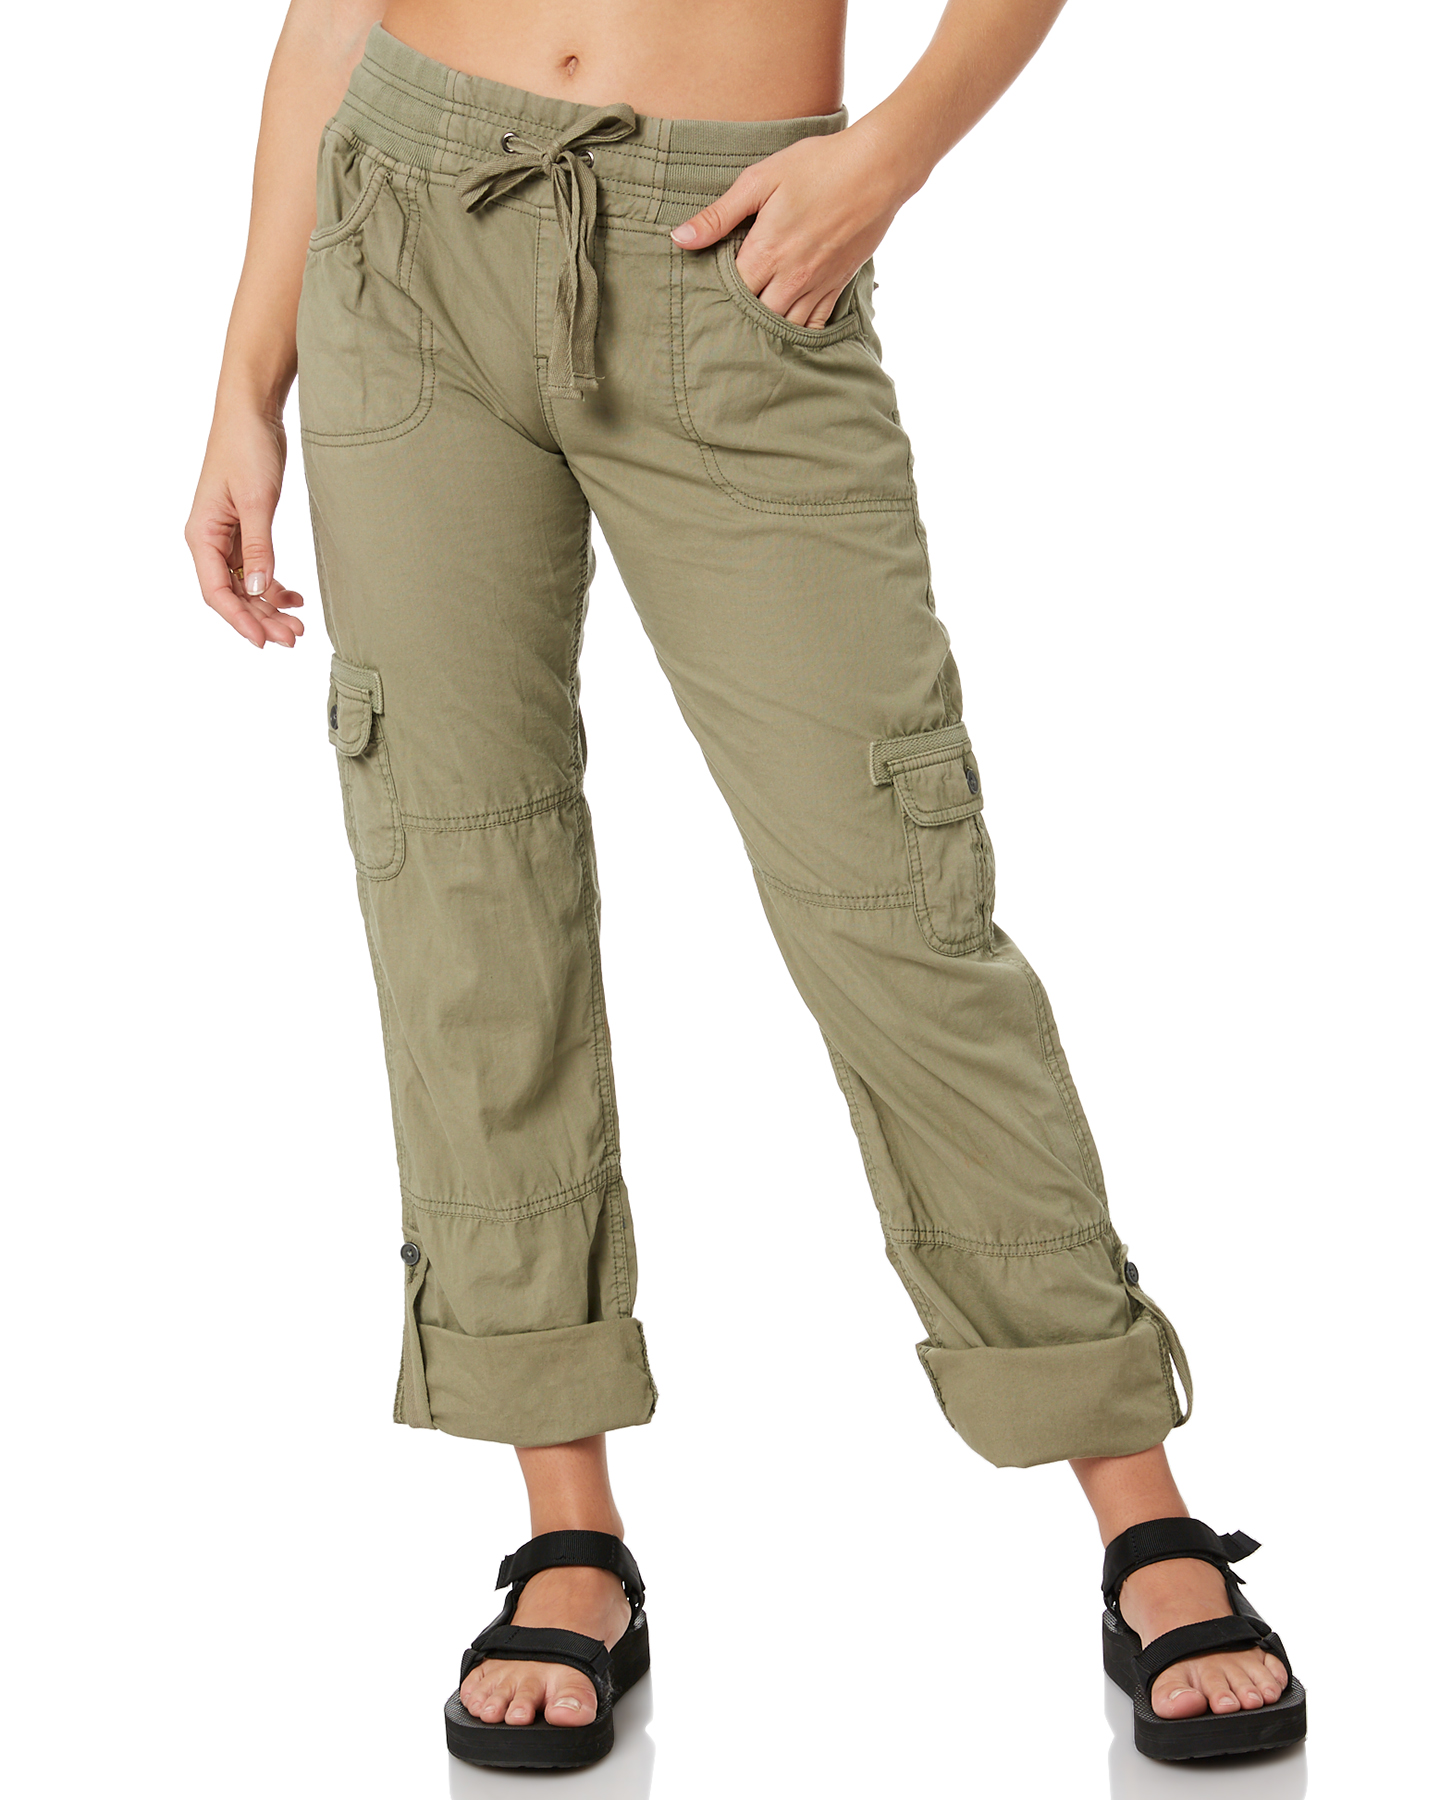 Rip Curl Almost Famous Ii Womens Pant - Vetiver | SurfStitch